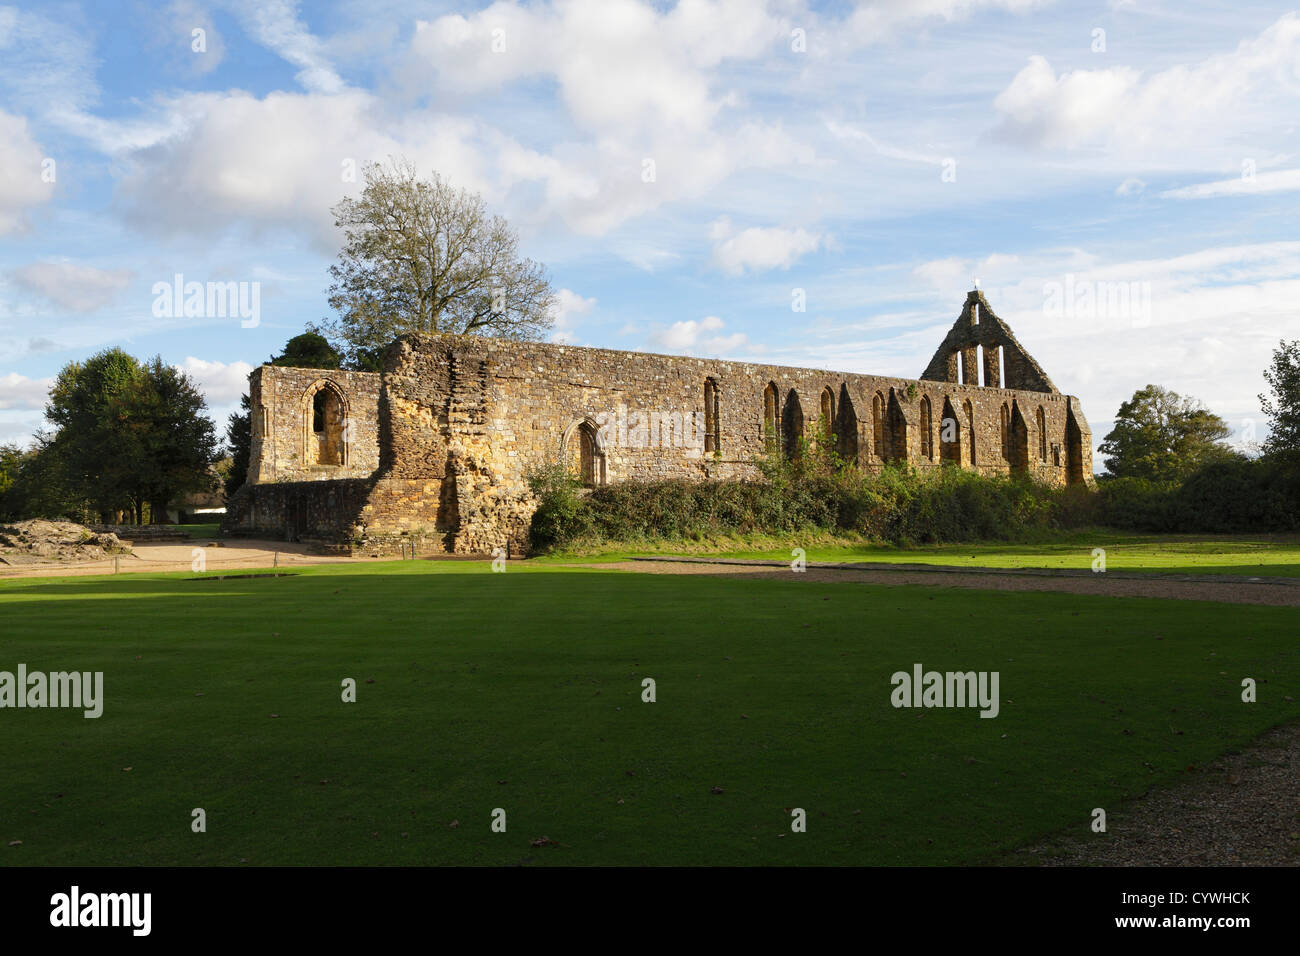 Battle Abbey UK. Site of the Norman Conquest Battle of Hastings 1066, East Sussex, England, UK, GB Stock Photo